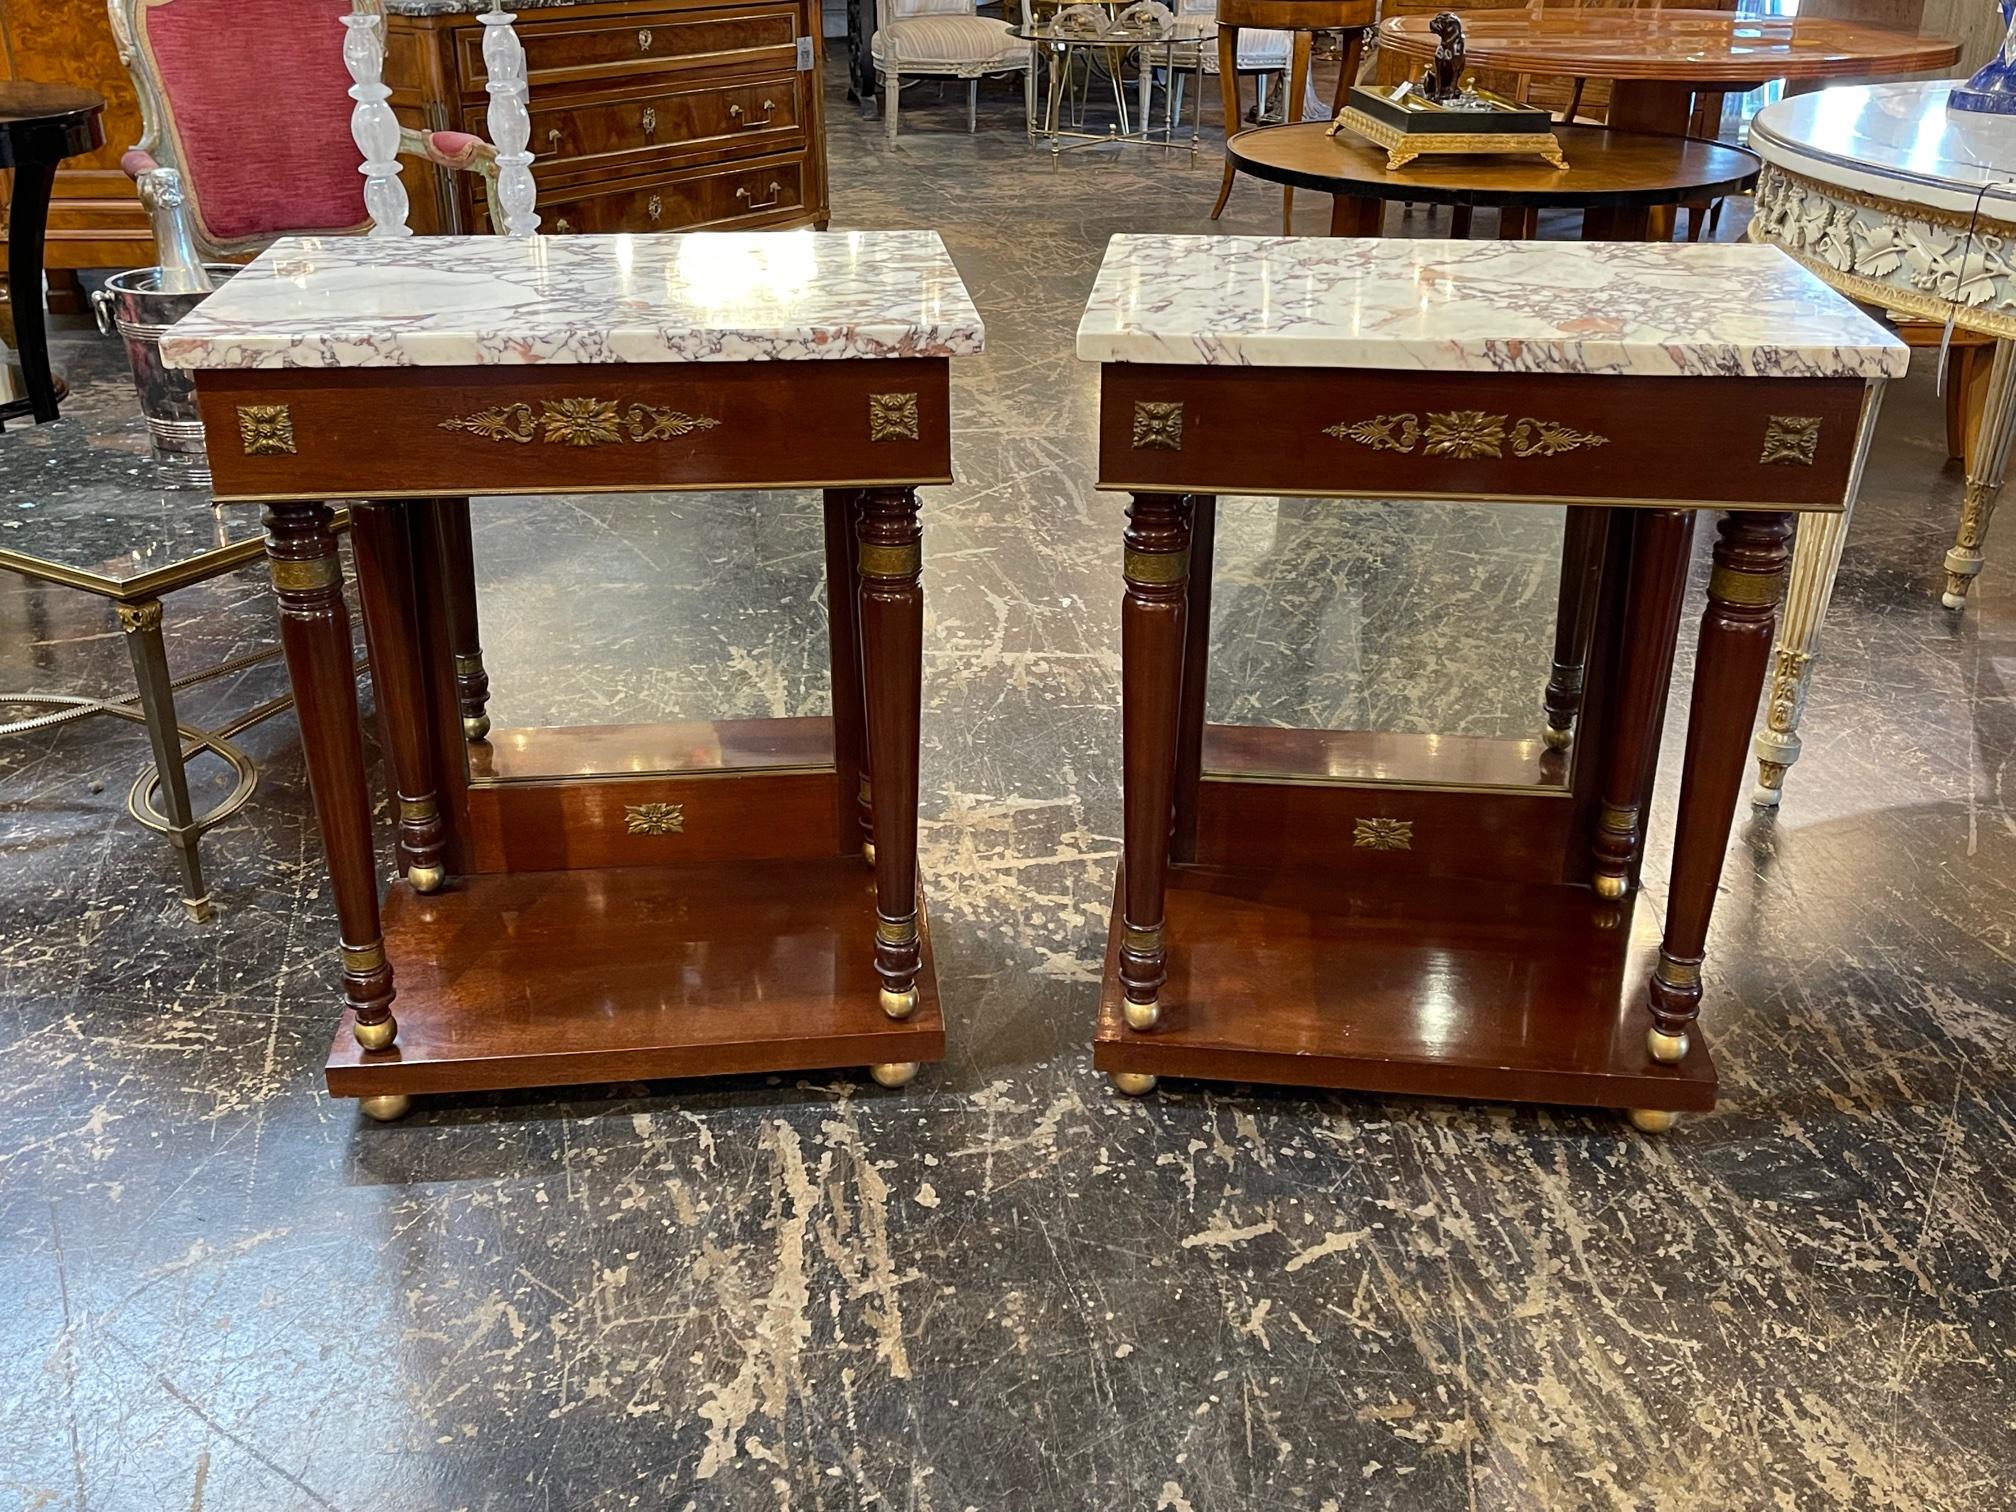 Fine pair of French Empire mahogany and gilt bronze side tables with breccia marble. Circa 1860. A fine addition to any home.